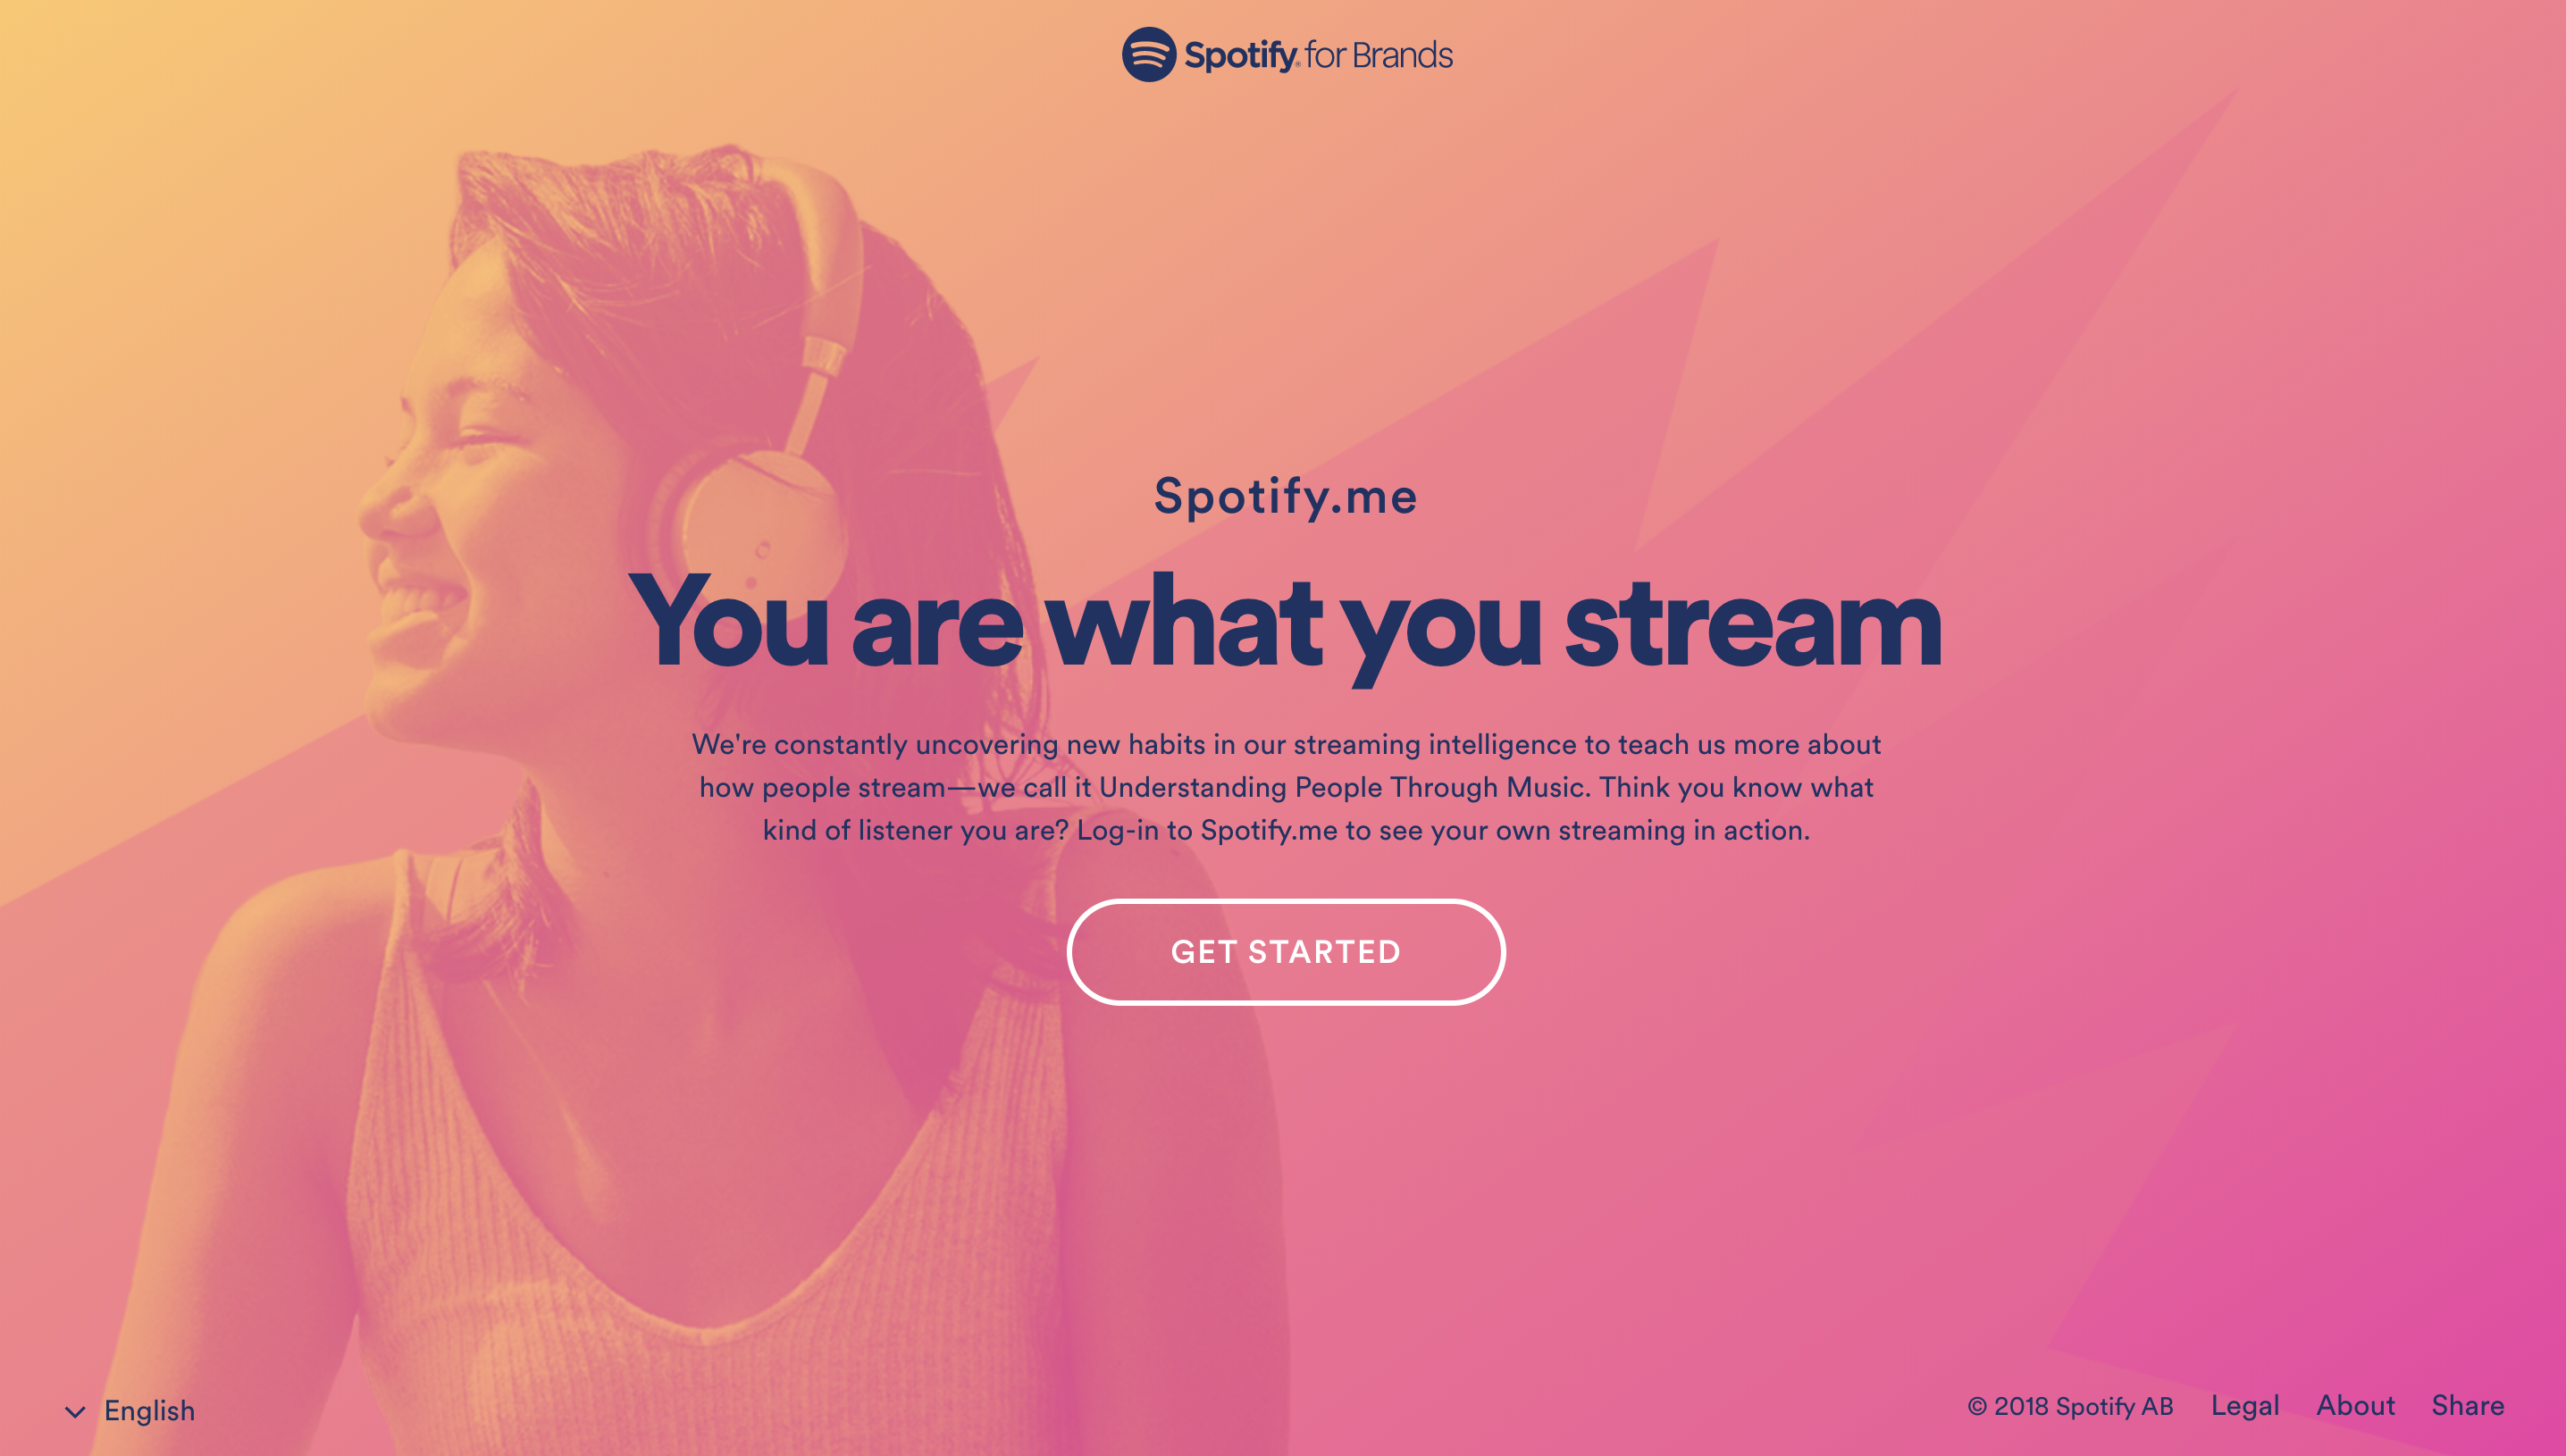 Spotify.me's "You are what you stream"